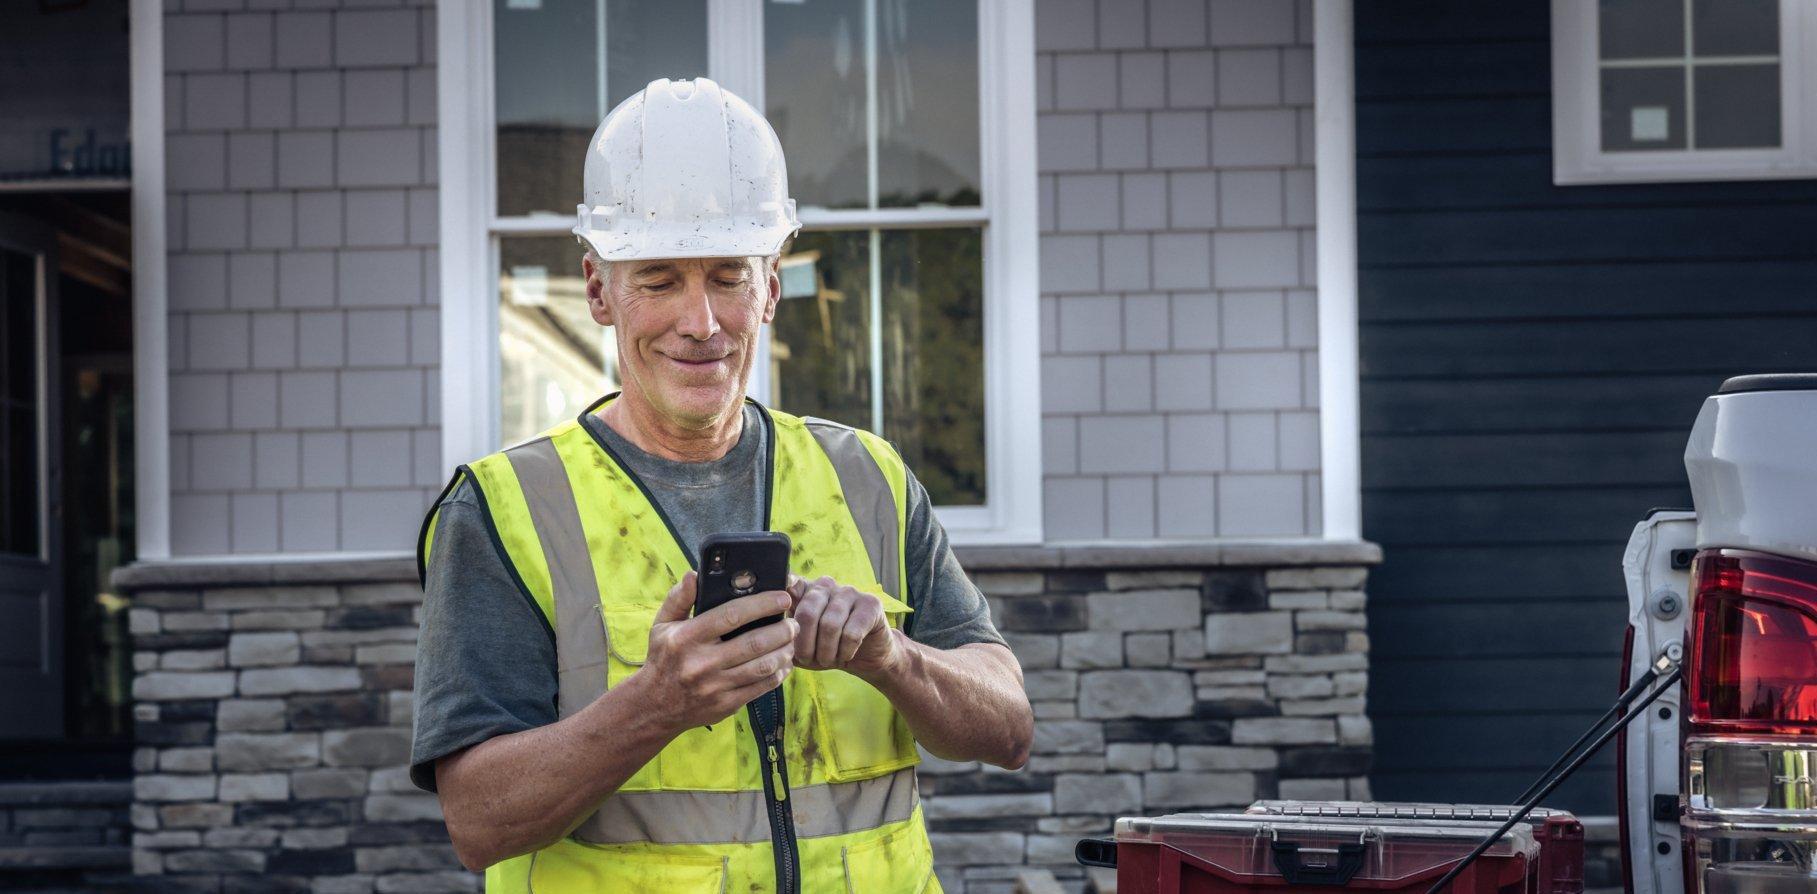 A contractor on a residential build site smiles as he taps on his smartphone.